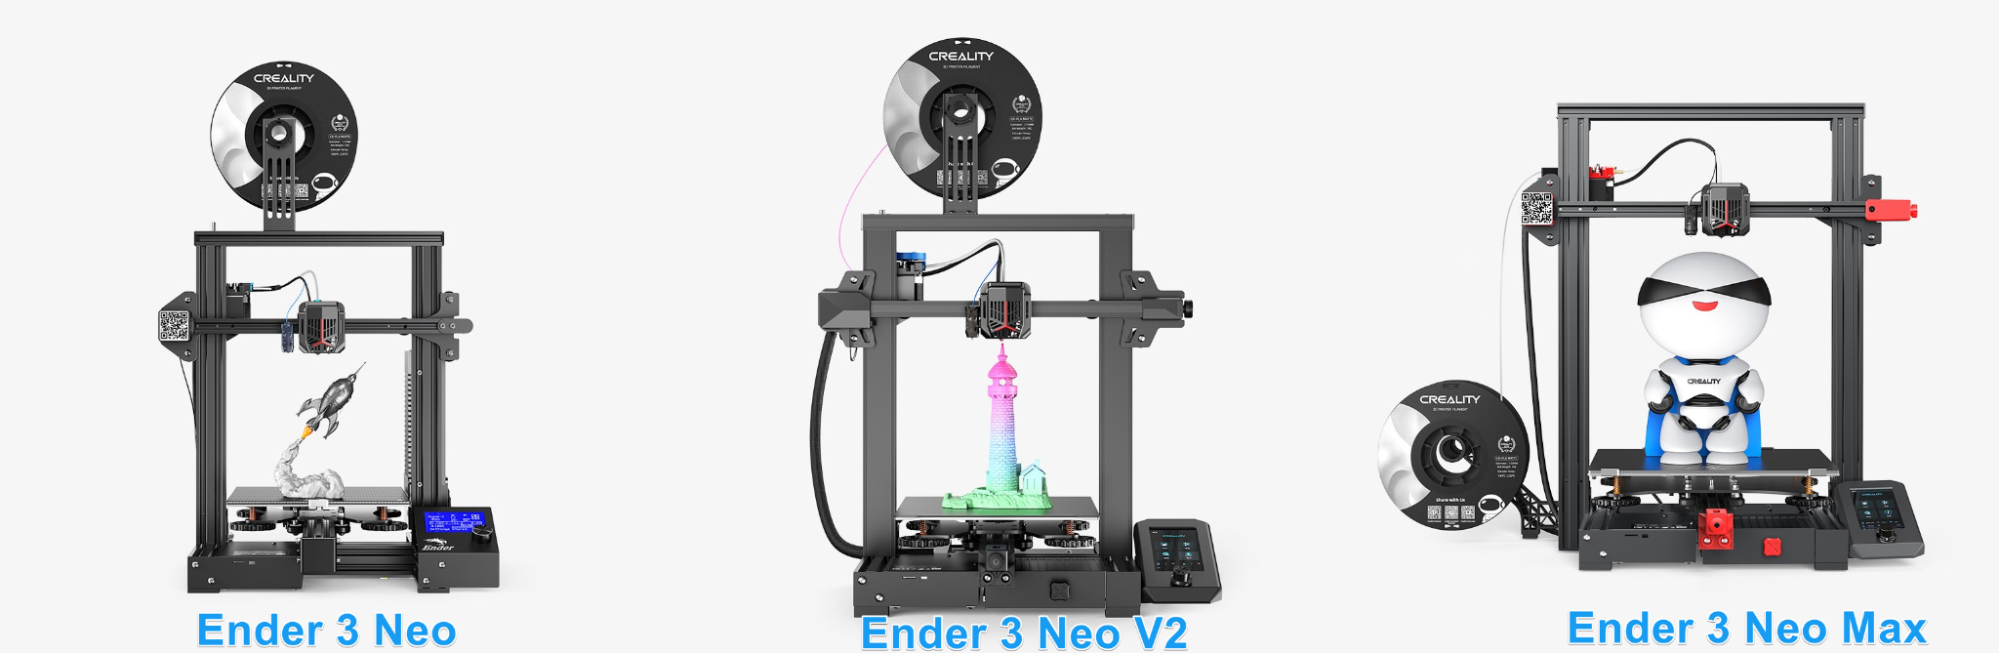 The Ender Neo series - Which Is The Best Ender For You?